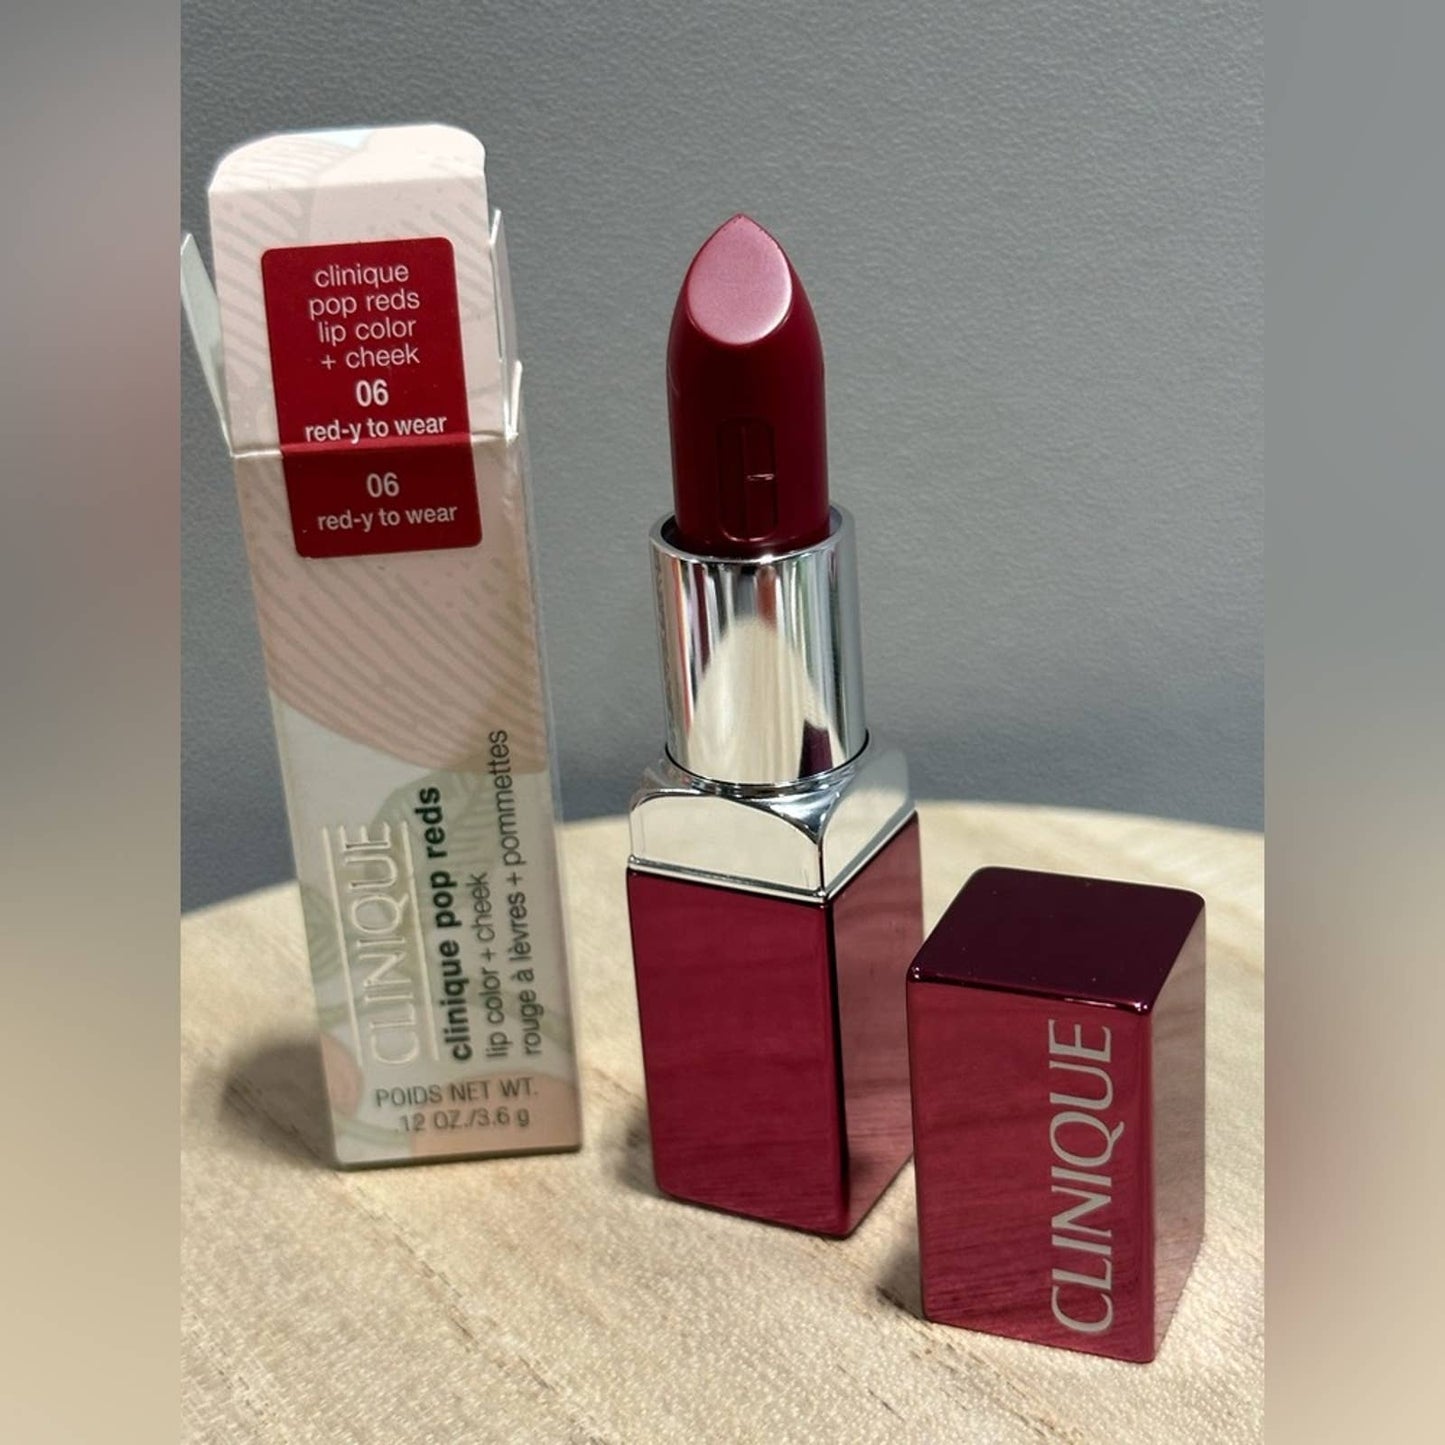 Clinique Lipstick CLEARANCE! Pop Reds Lip Color + Cheek 06 Red-y to Wear